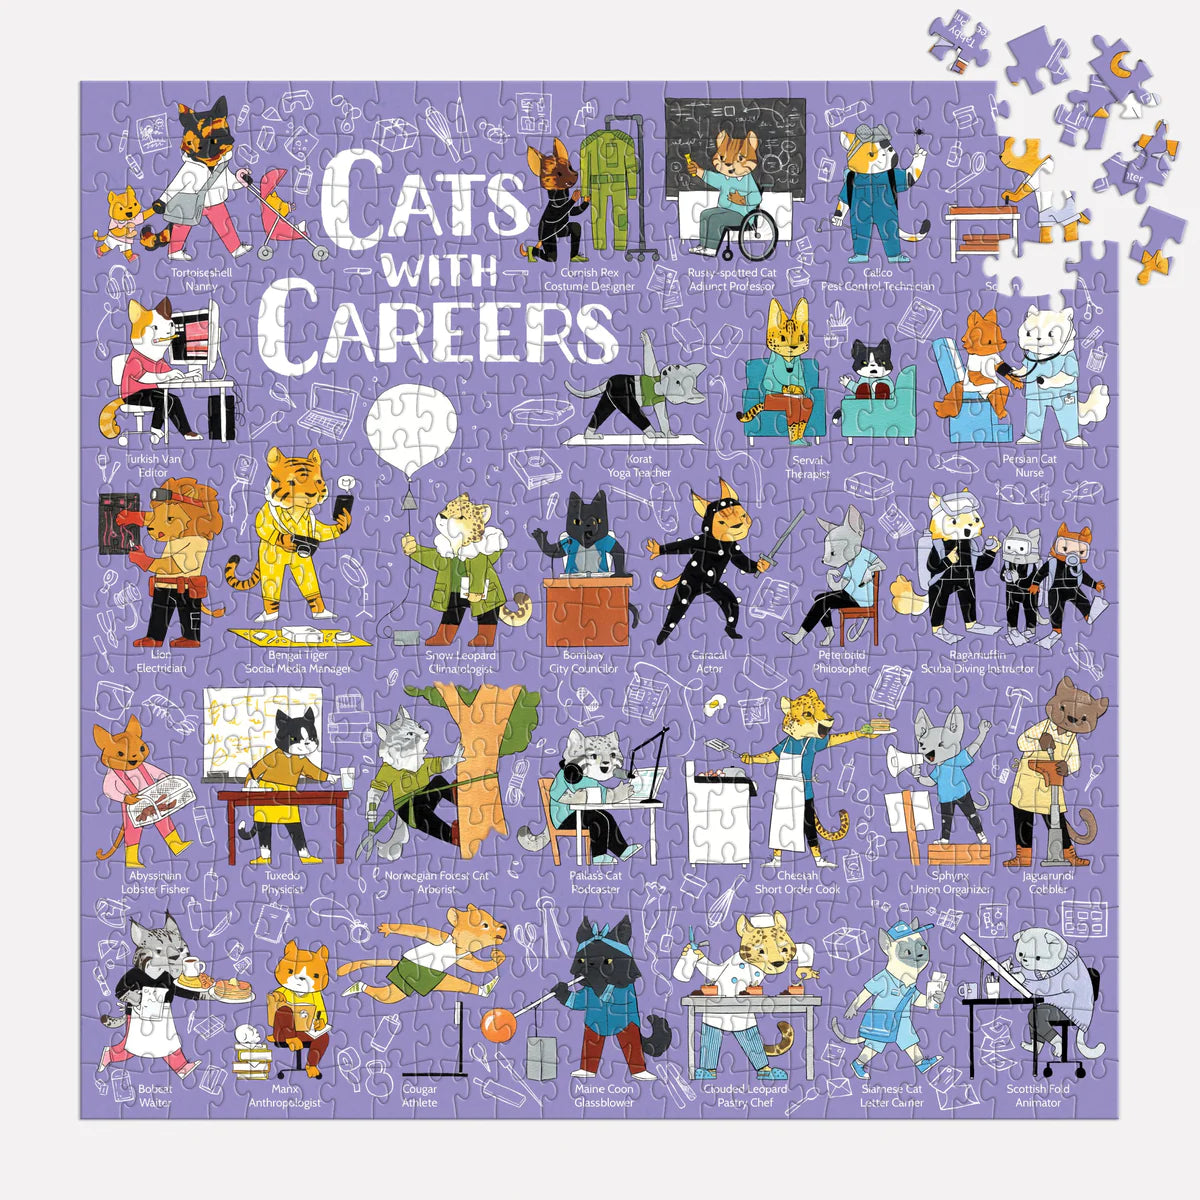 Cats With Careers 500 Piece Puzzle